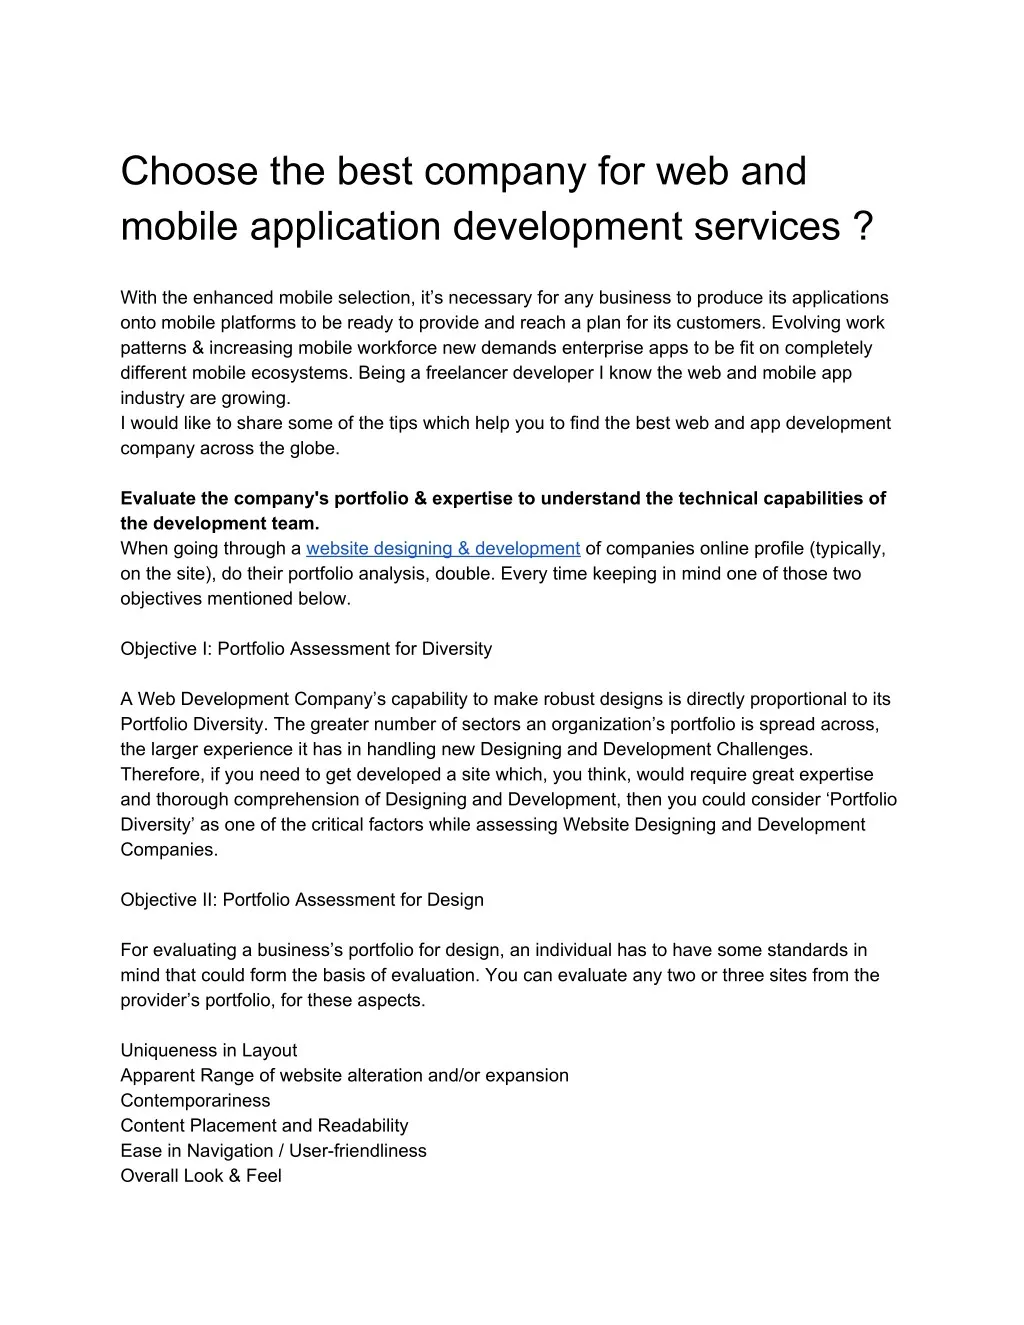 choose the best company for web and mobile